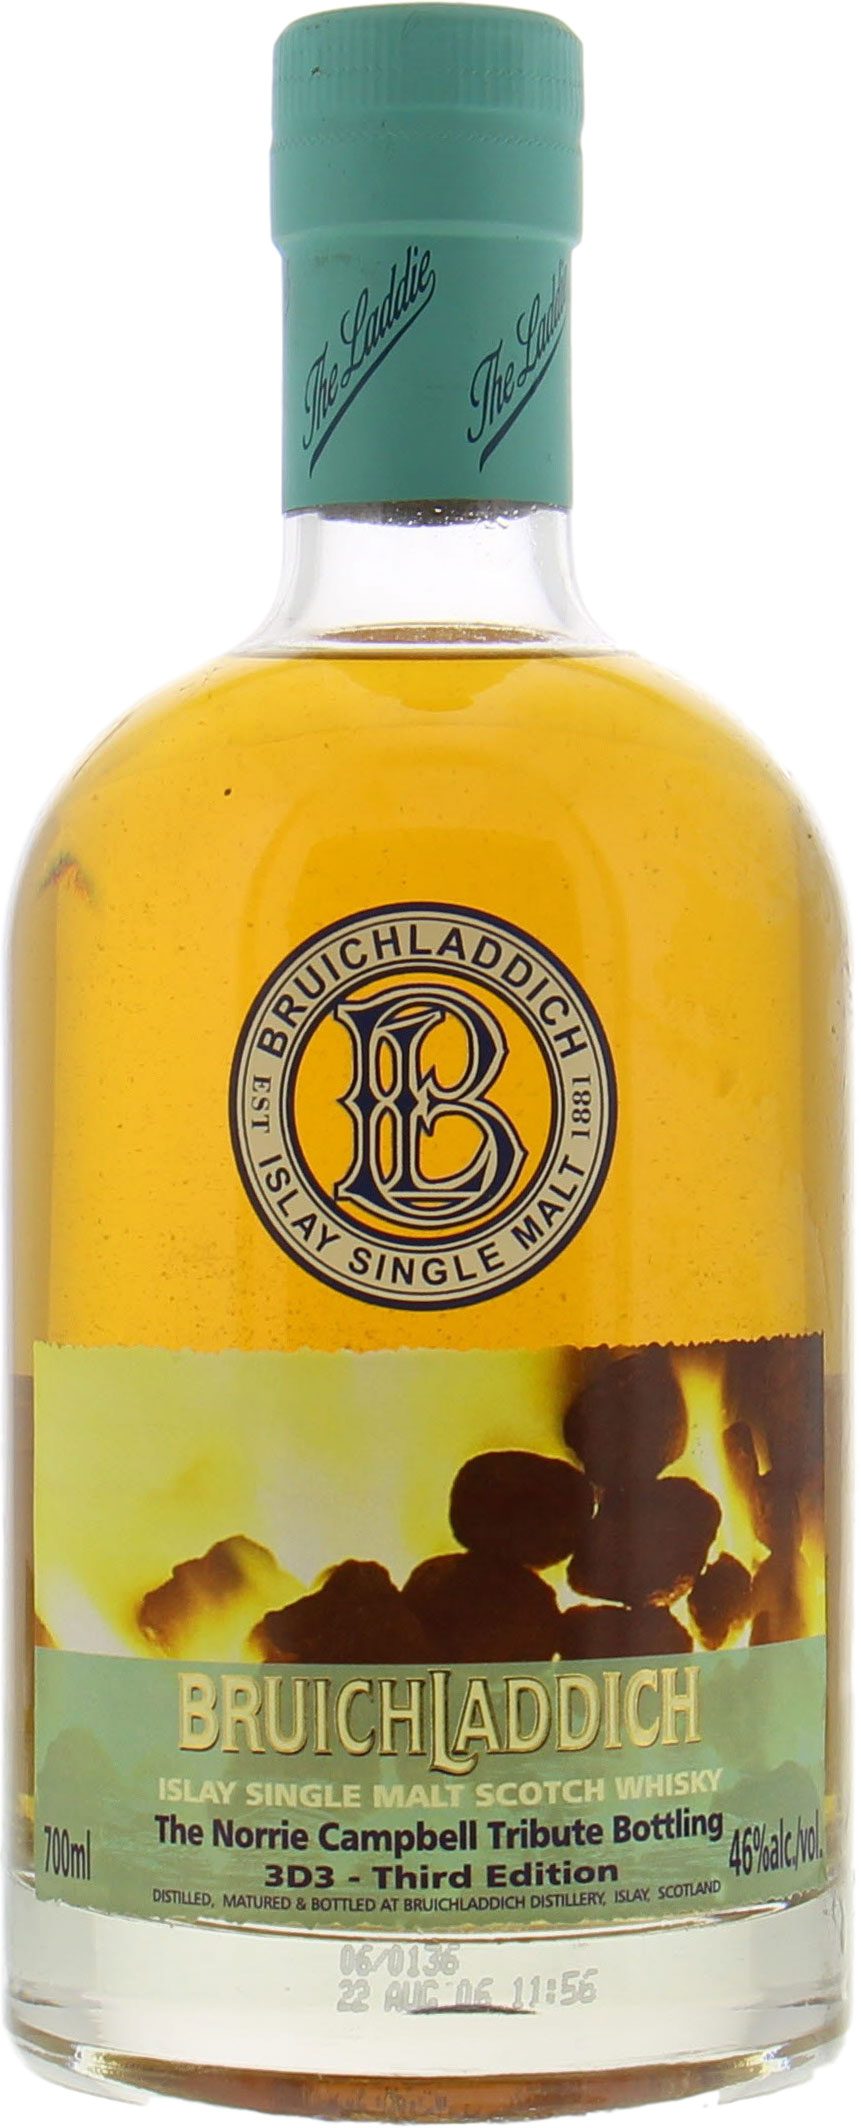 Bruichladdich - 3D3 Third Edition The Norrie Campbell Tribute Bottling 46% NV No Original Container Included!